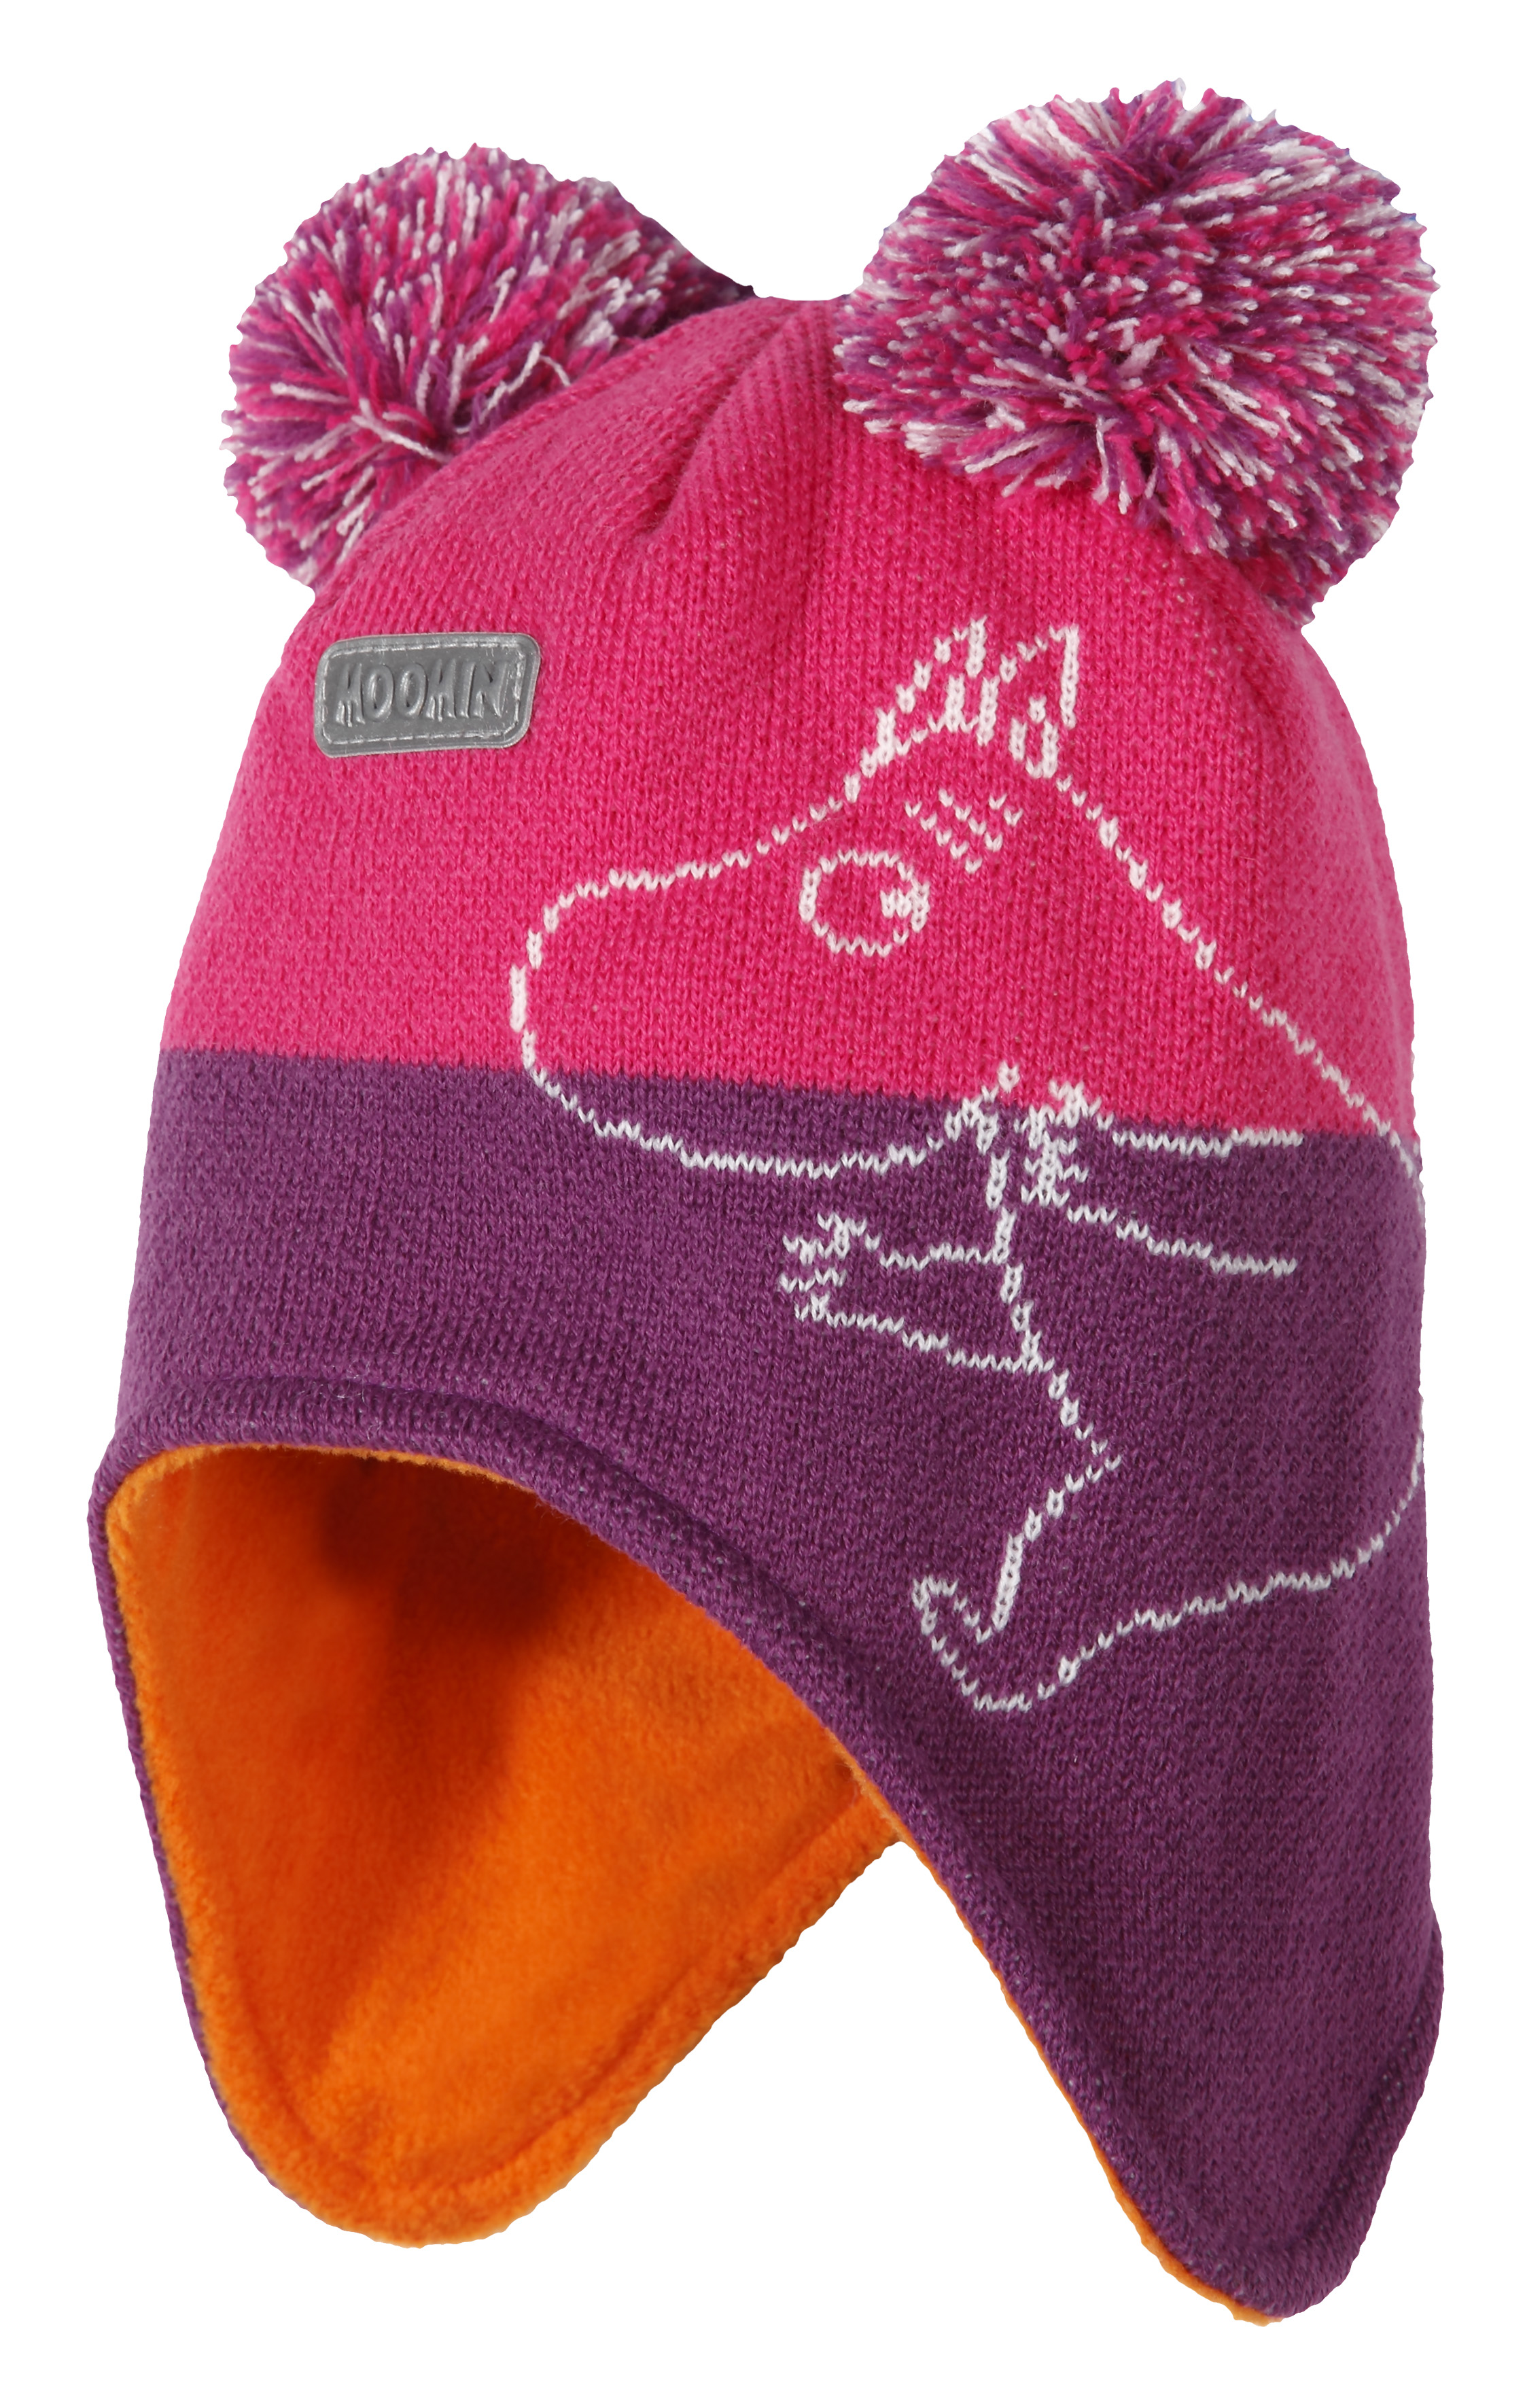 L-Fashion Group Oy - Girls knitted hat